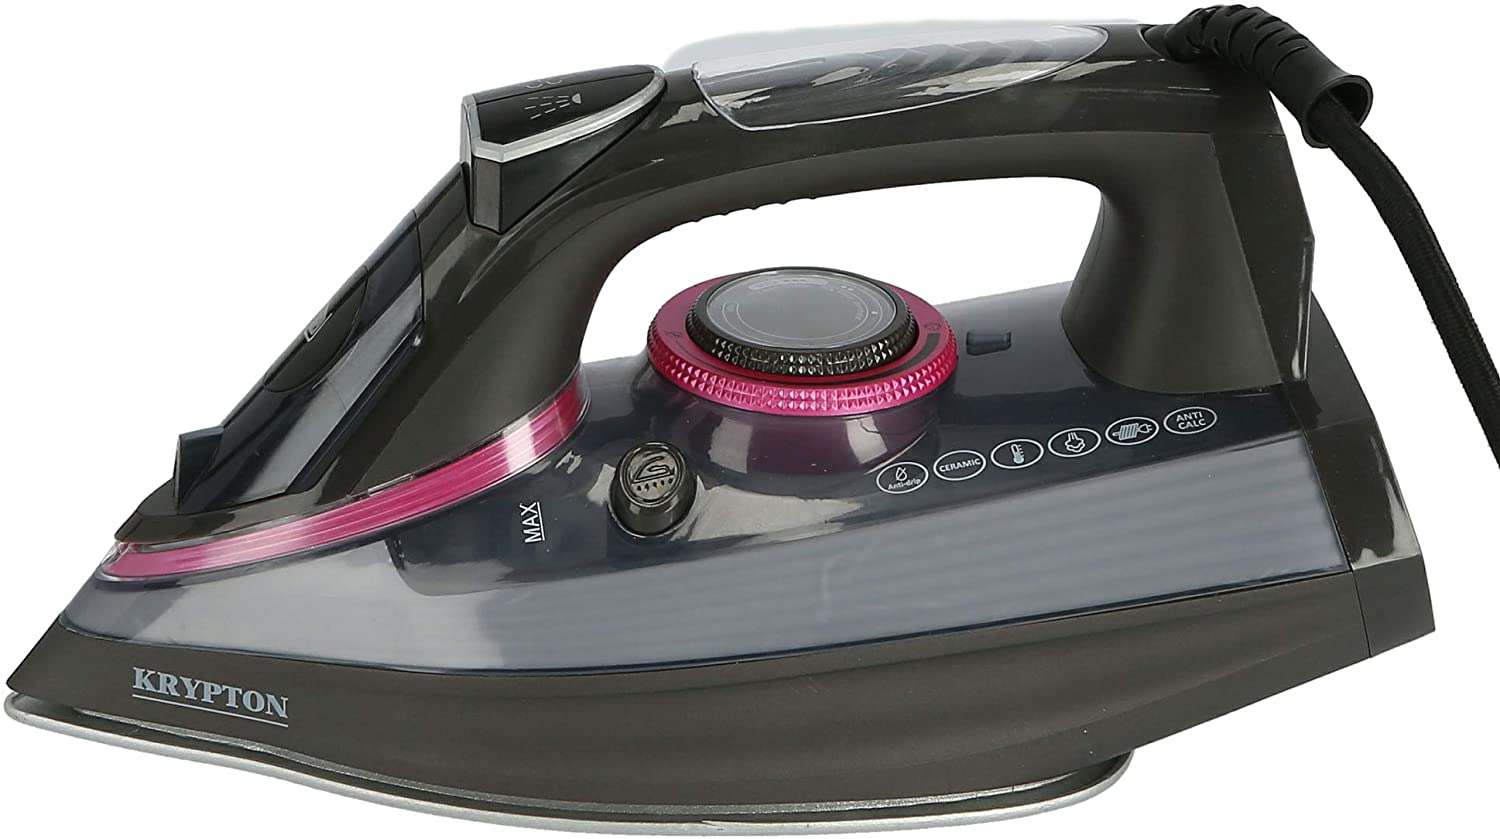 Krypton Steam Iron Black & White | reliable performance | lightweight | variable steam settings | safety features | stylish | even heat distribution | Halabh.com